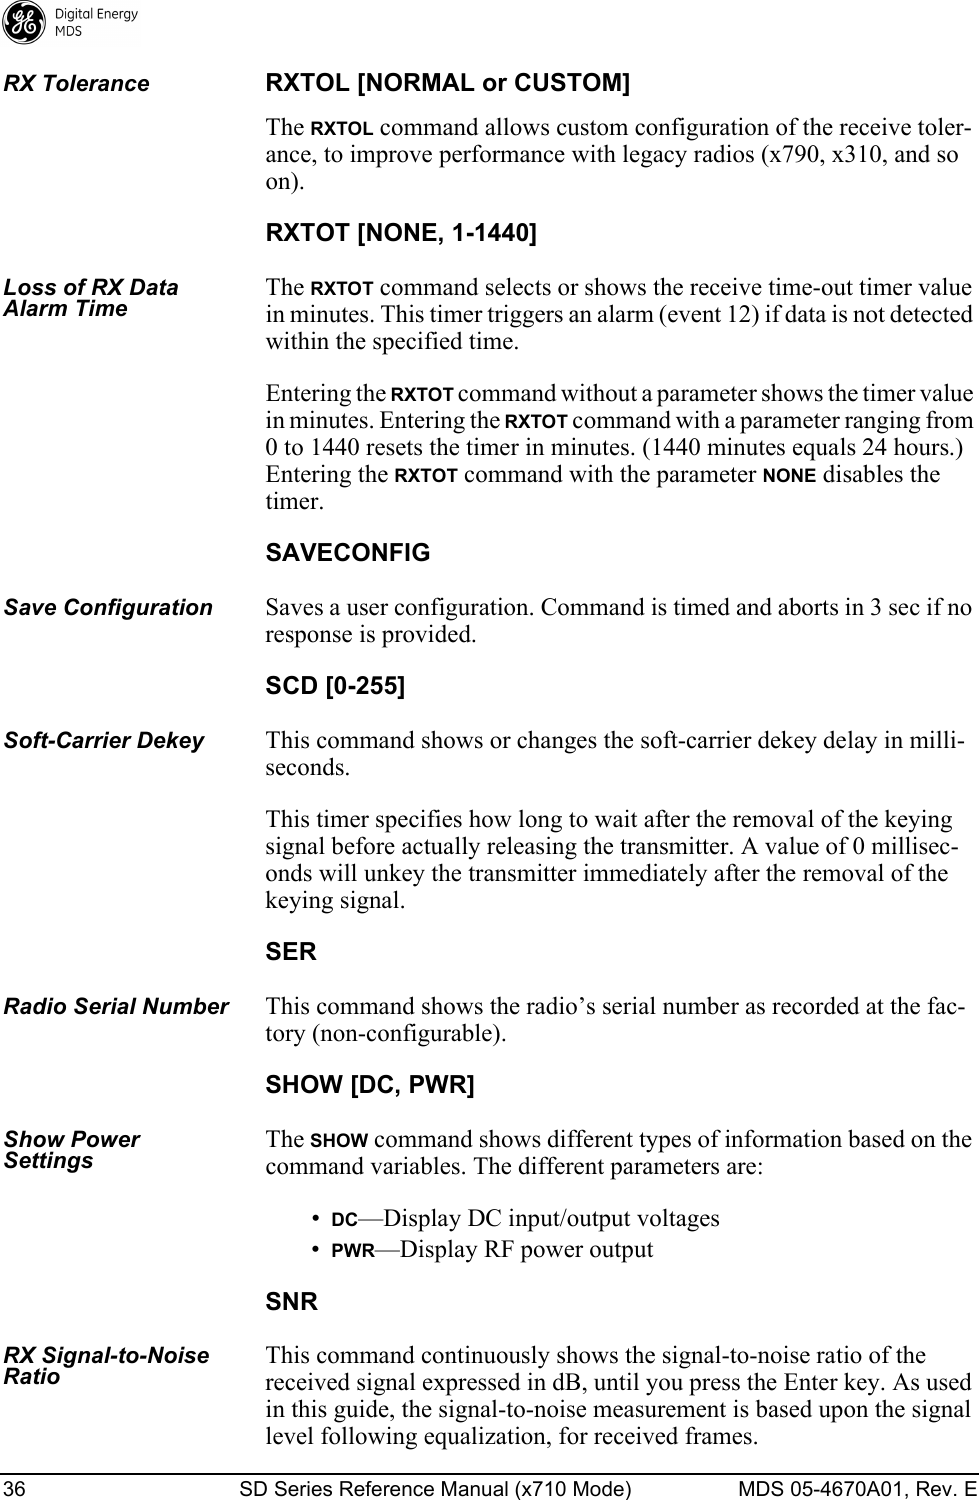 36 SD Series Reference Manual (x710 Mode) MDS 05-4670A01, Rev. E RX ToleranceRXTOL [NORMAL or CUSTOM]The RXTOL command allows custom configuration of the receive toler-ance, to improve performance with legacy radios (x790, x310, and so on).RXTOT [NONE, 1-1440]Loss of RX Data Alarm TimeThe RXTOT command selects or shows the receive time-out timer value in minutes. This timer triggers an alarm (event 12) if data is not detected within the specified time.Entering the RXTOT command without a parameter shows the timer value in minutes. Entering the RXTOT command with a parameter ranging from 0 to 1440 resets the timer in minutes. (1440 minutes equals 24 hours.) Entering the RXTOT command with the parameter NONE disables the timer.SAVECONFIGSave ConfigurationSaves a user configuration. Command is timed and aborts in 3 sec if no response is provided.SCD [0-255]Soft-Carrier DekeyThis command shows or changes the soft-carrier dekey delay in milli-seconds.This timer specifies how long to wait after the removal of the keying signal before actually releasing the transmitter. A value of 0 millisec-onds will unkey the transmitter immediately after the removal of the keying signal.SERRadio Serial NumberThis command shows the radio’s serial number as recorded at the fac-tory (non-configurable).SHOW [DC, PWR]Show Power SettingsThe SHOW command shows different types of information based on the command variables. The different parameters are:•DC—Display DC input/output voltages•PWR—Display RF power outputSNRRX Signal-to-Noise RatioThis command continuously shows the signal-to-noise ratio of the received signal expressed in dB, until you press the Enter key. As used in this guide, the signal-to-noise measurement is based upon the signal level following equalization, for received frames.